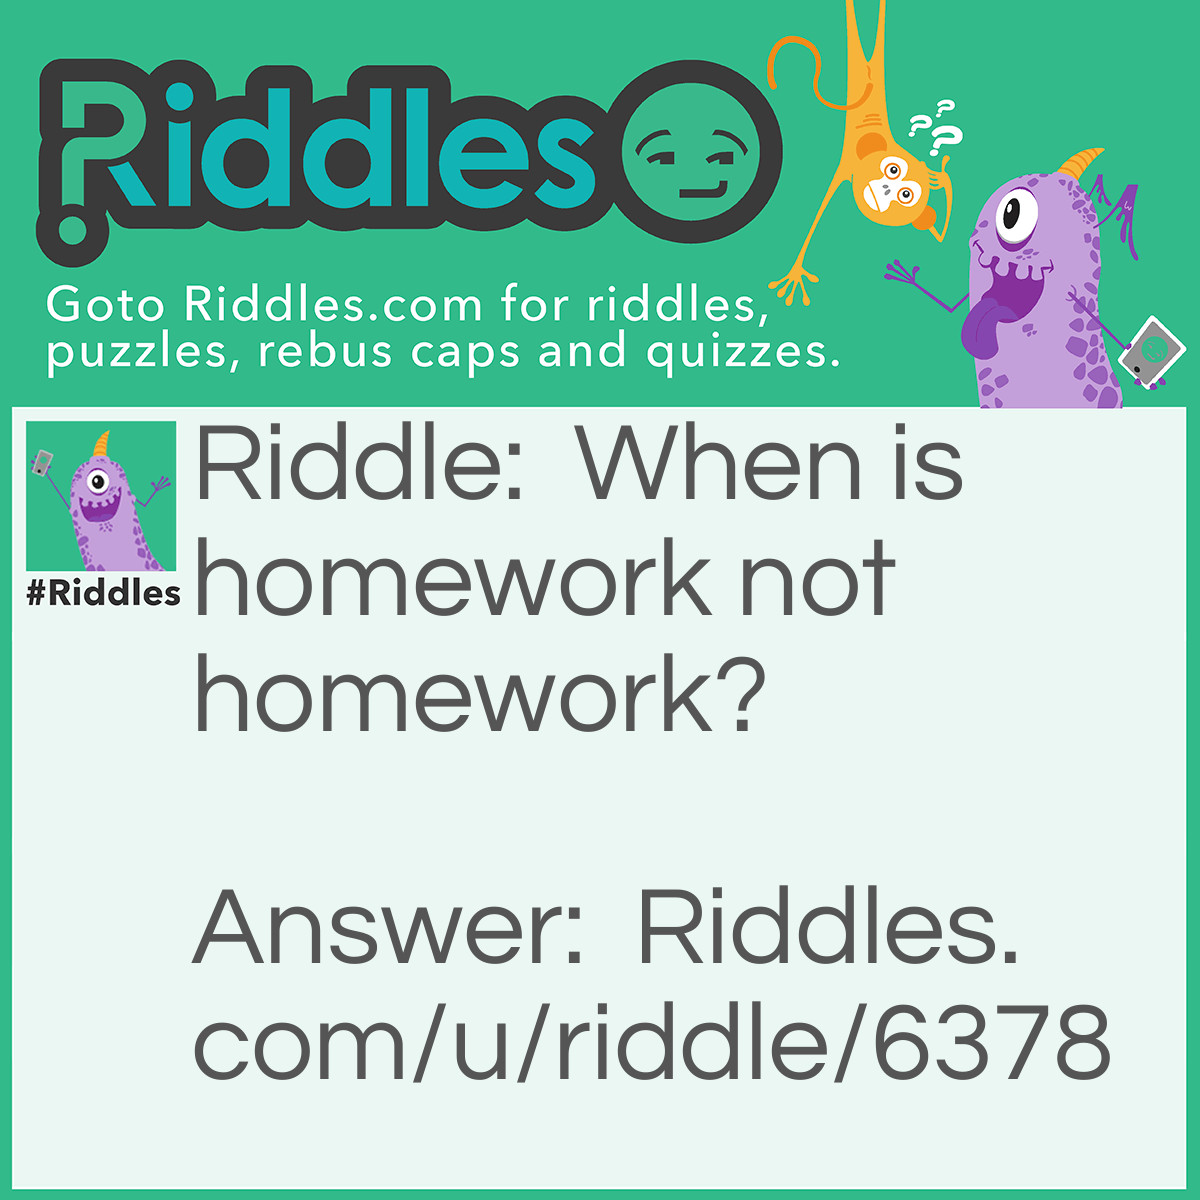 Riddle: When is homework not homework? Answer: When it’s turned into the teacher.